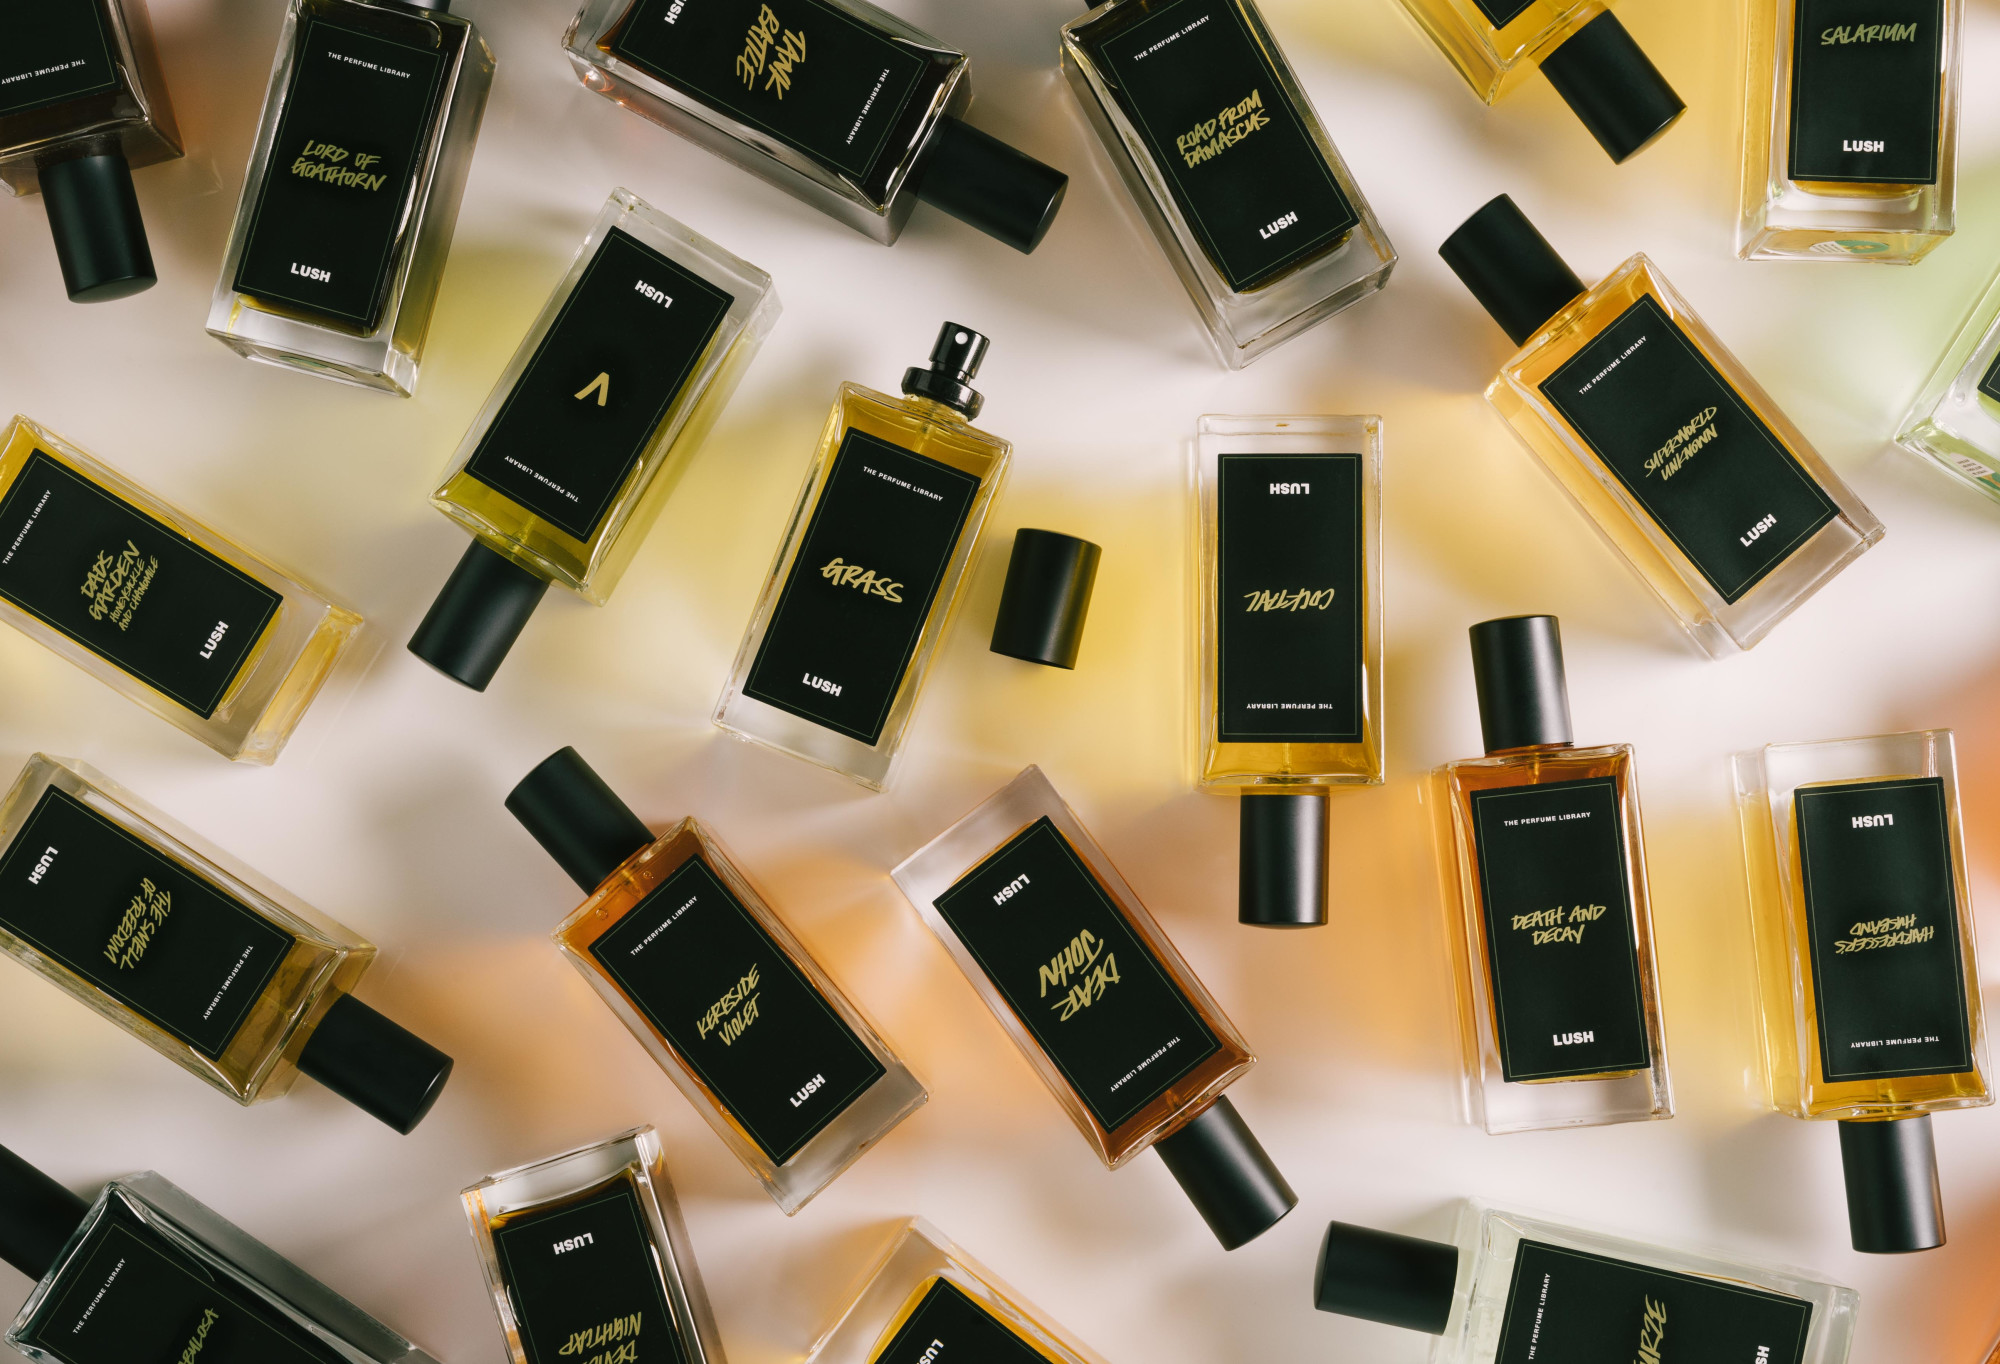 A number of black label perfume bottles are arranged randomly, with Grass in the centre, lid off, ready to spritz.